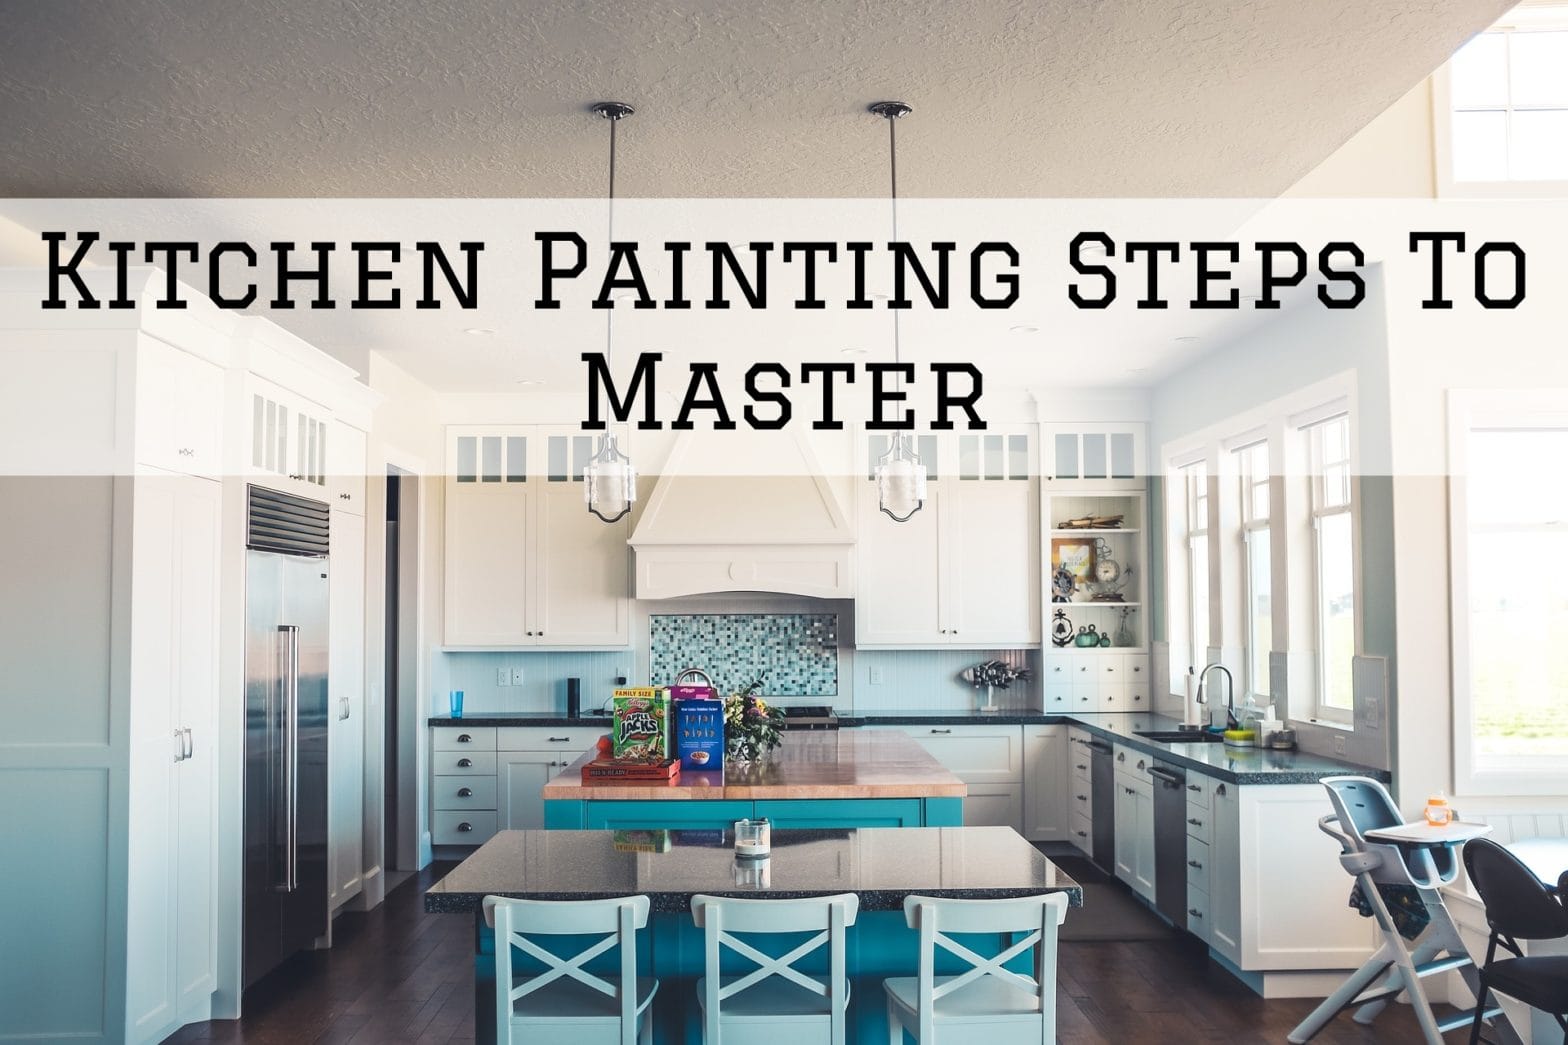 2023-01-01 DW Painting Wallpapering Hamilton Ontario Kitchen Painting Steps